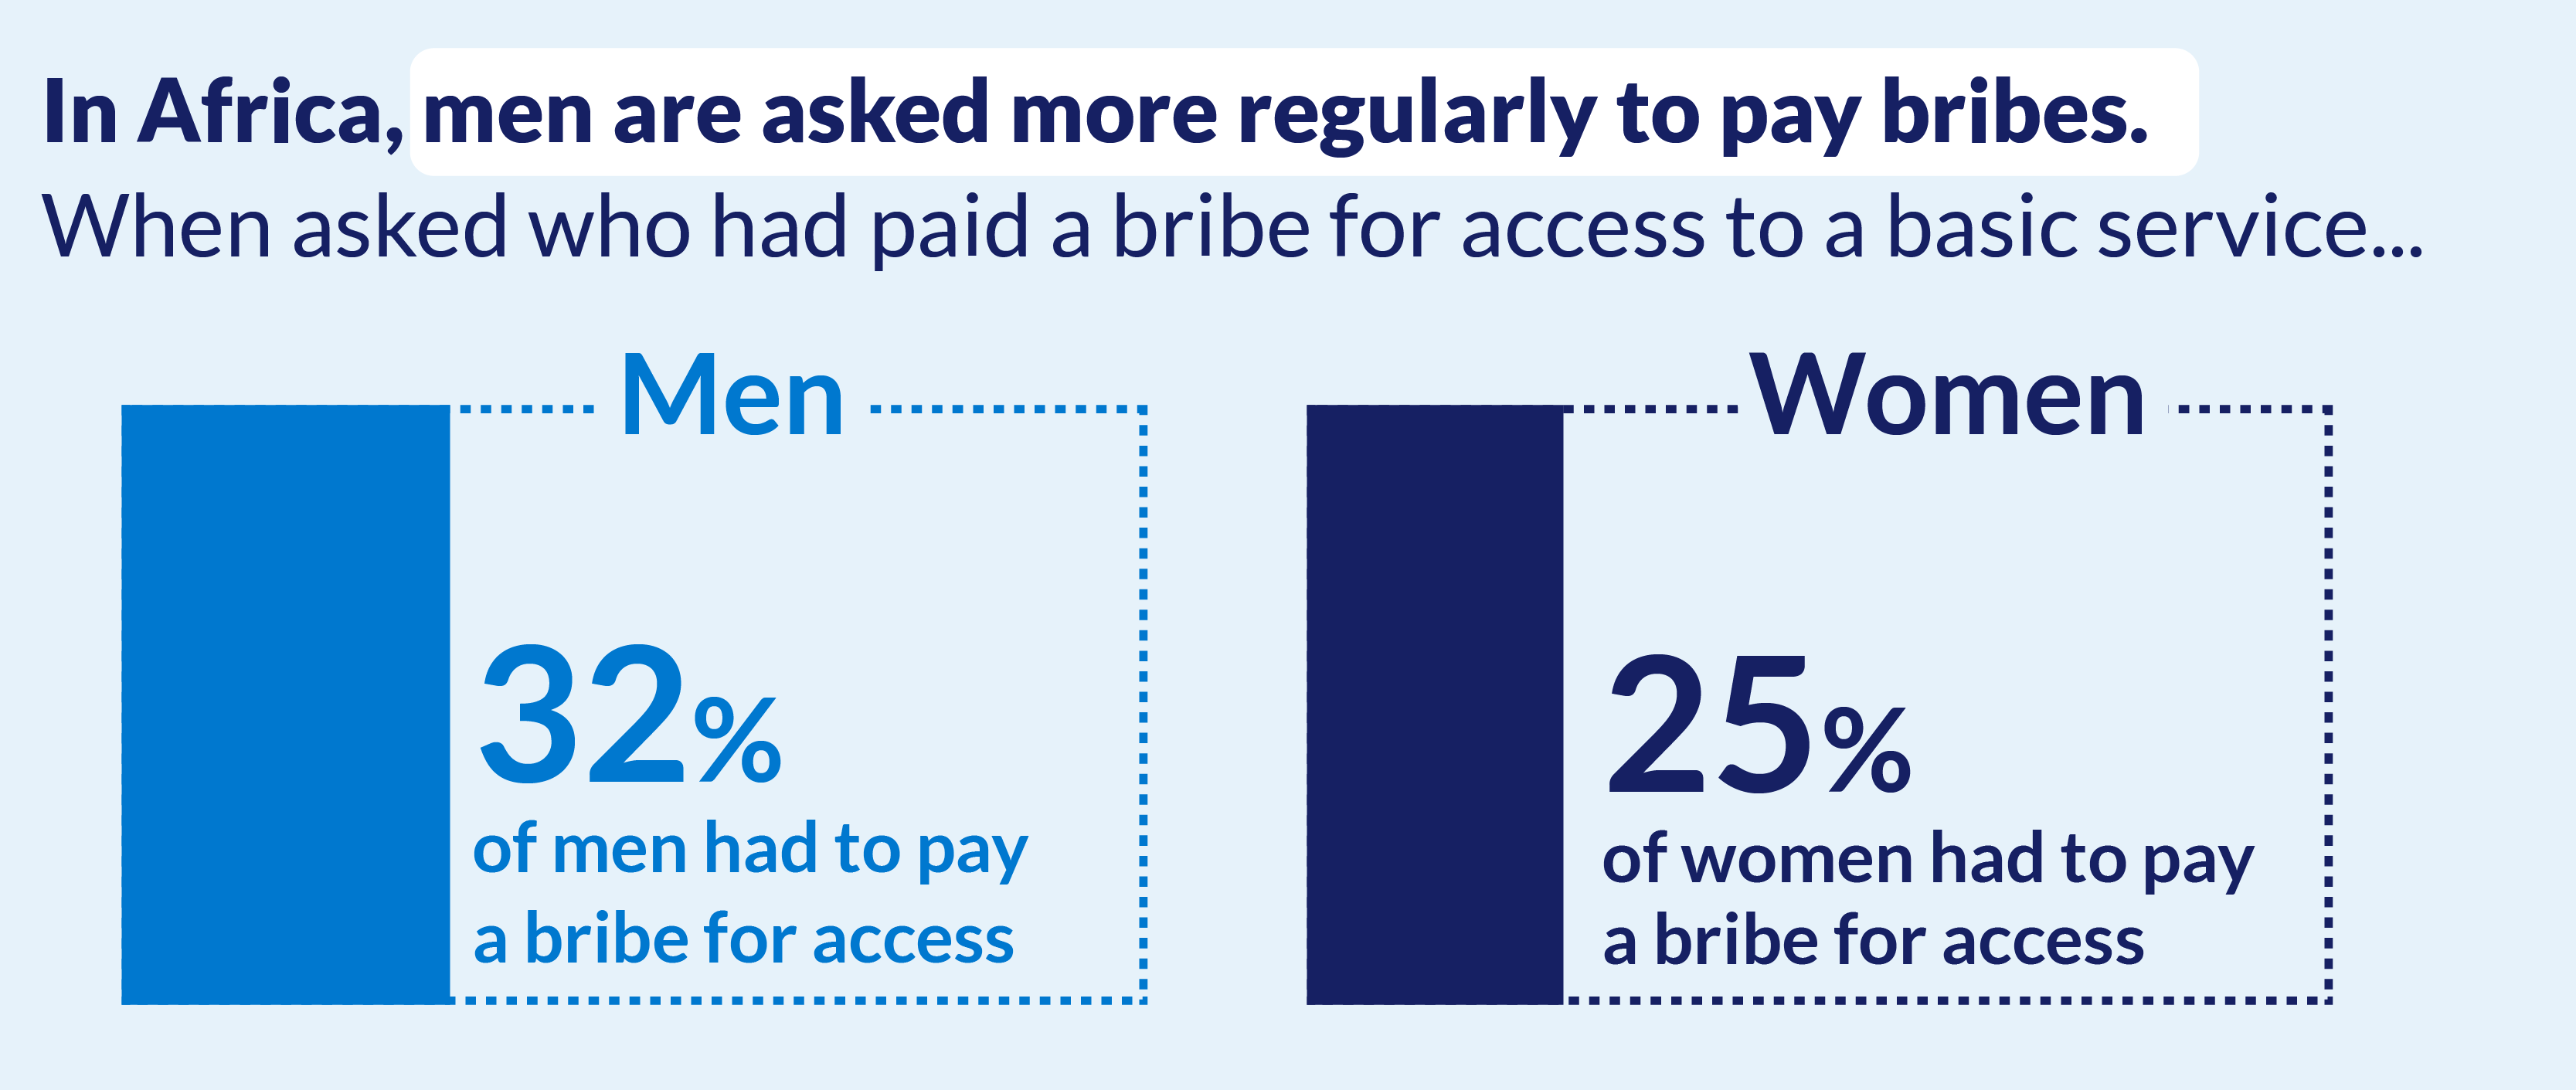 A short infographic, reading: In Africa, men are asked more regularly to pay bribes. When asked who had paid a bribe for access to a basic service... Data bars show that 32% of men had paid a monetary bribe. 25% of women had paid a monetary bribe.